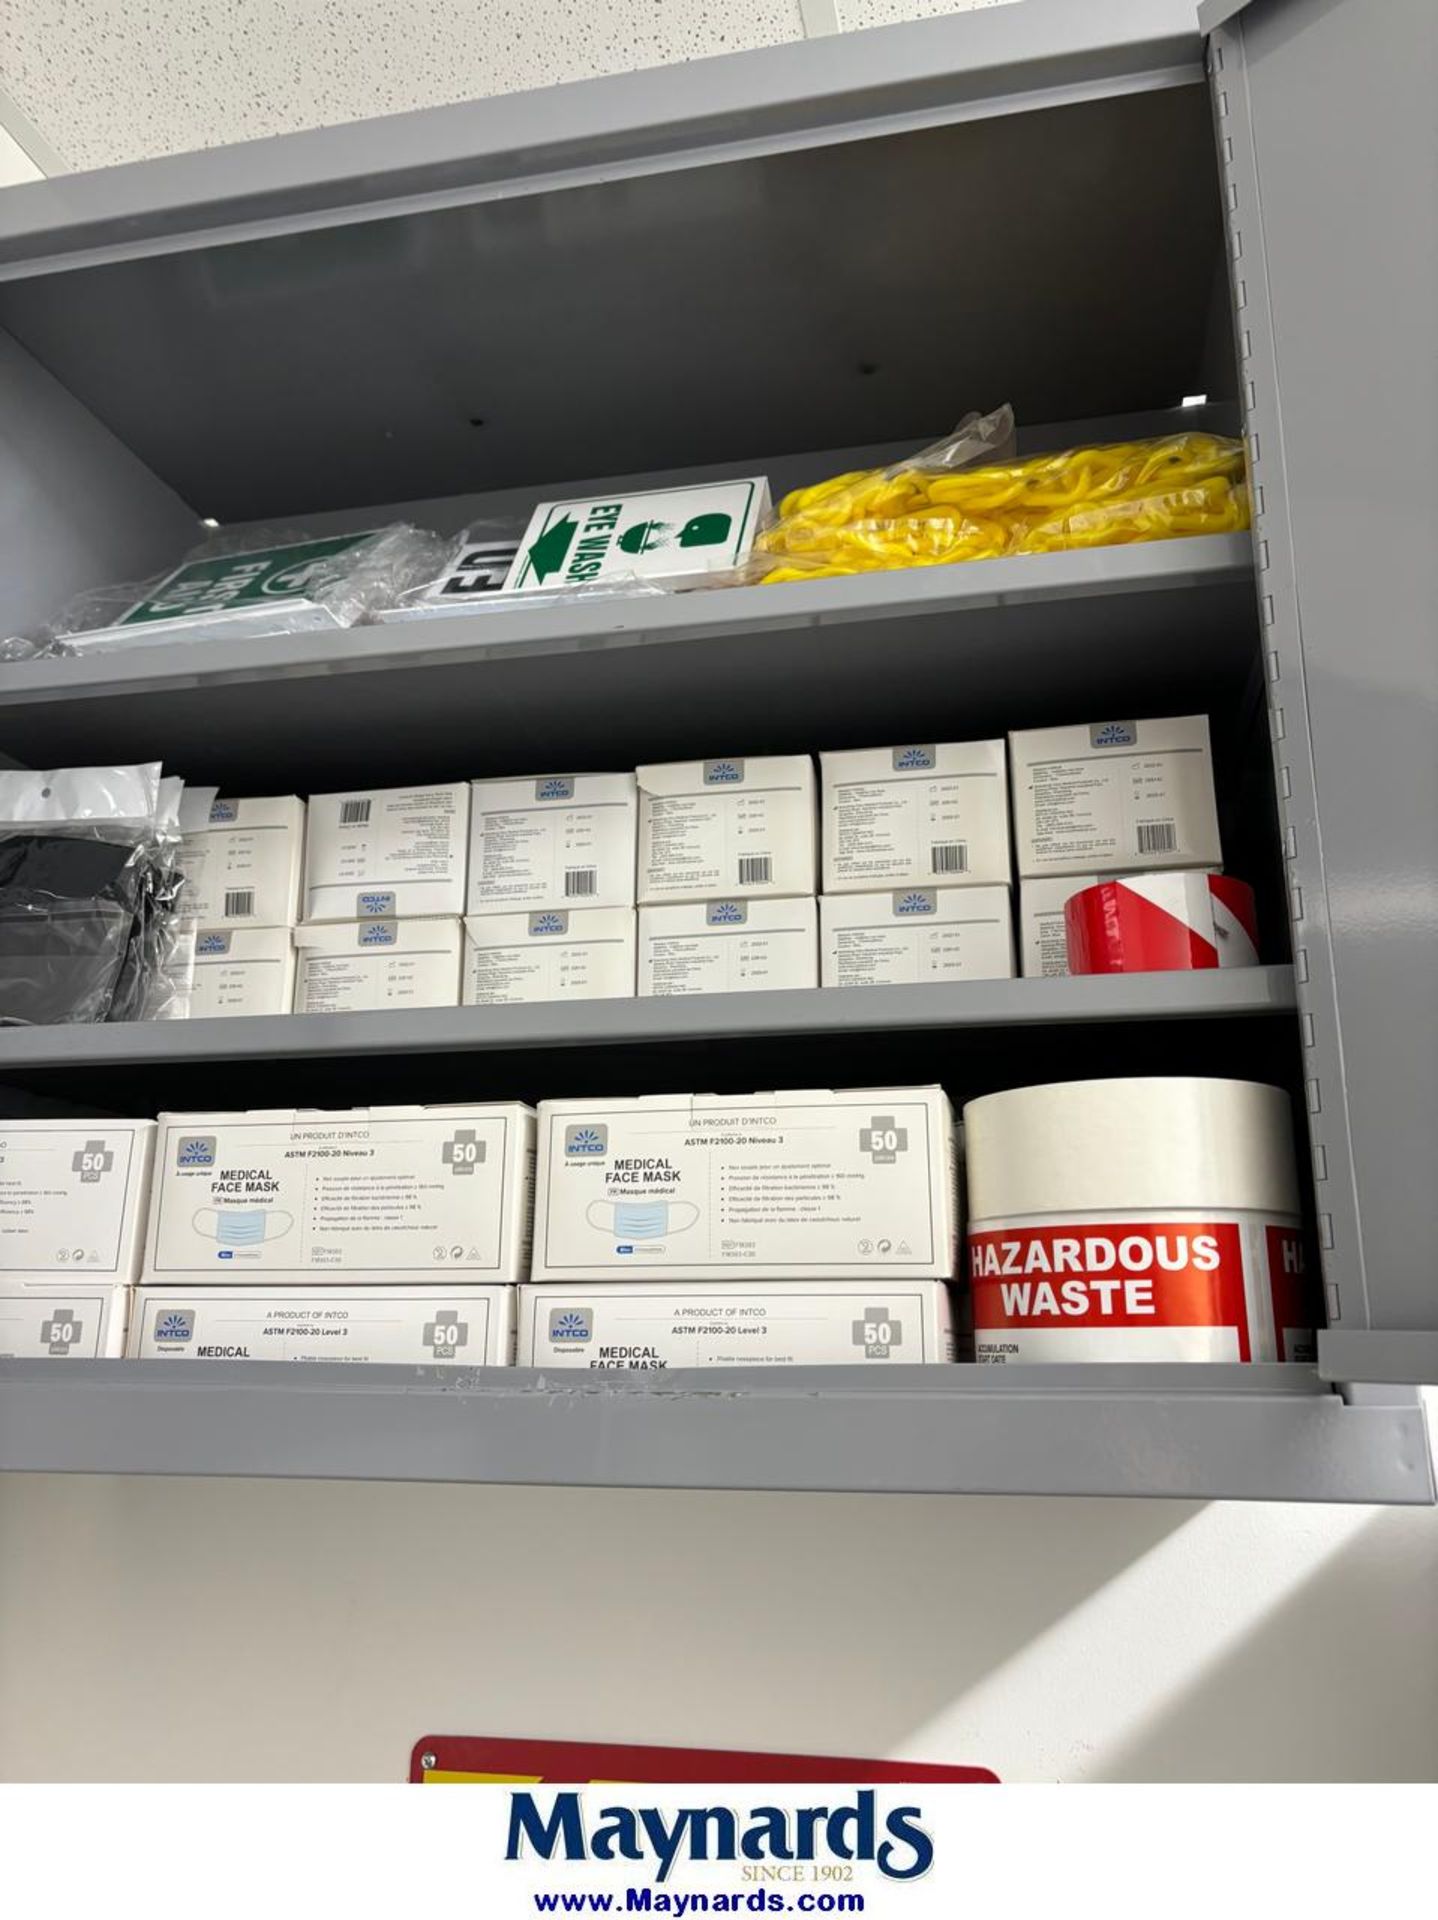 Contents of first aid room - Image 4 of 5